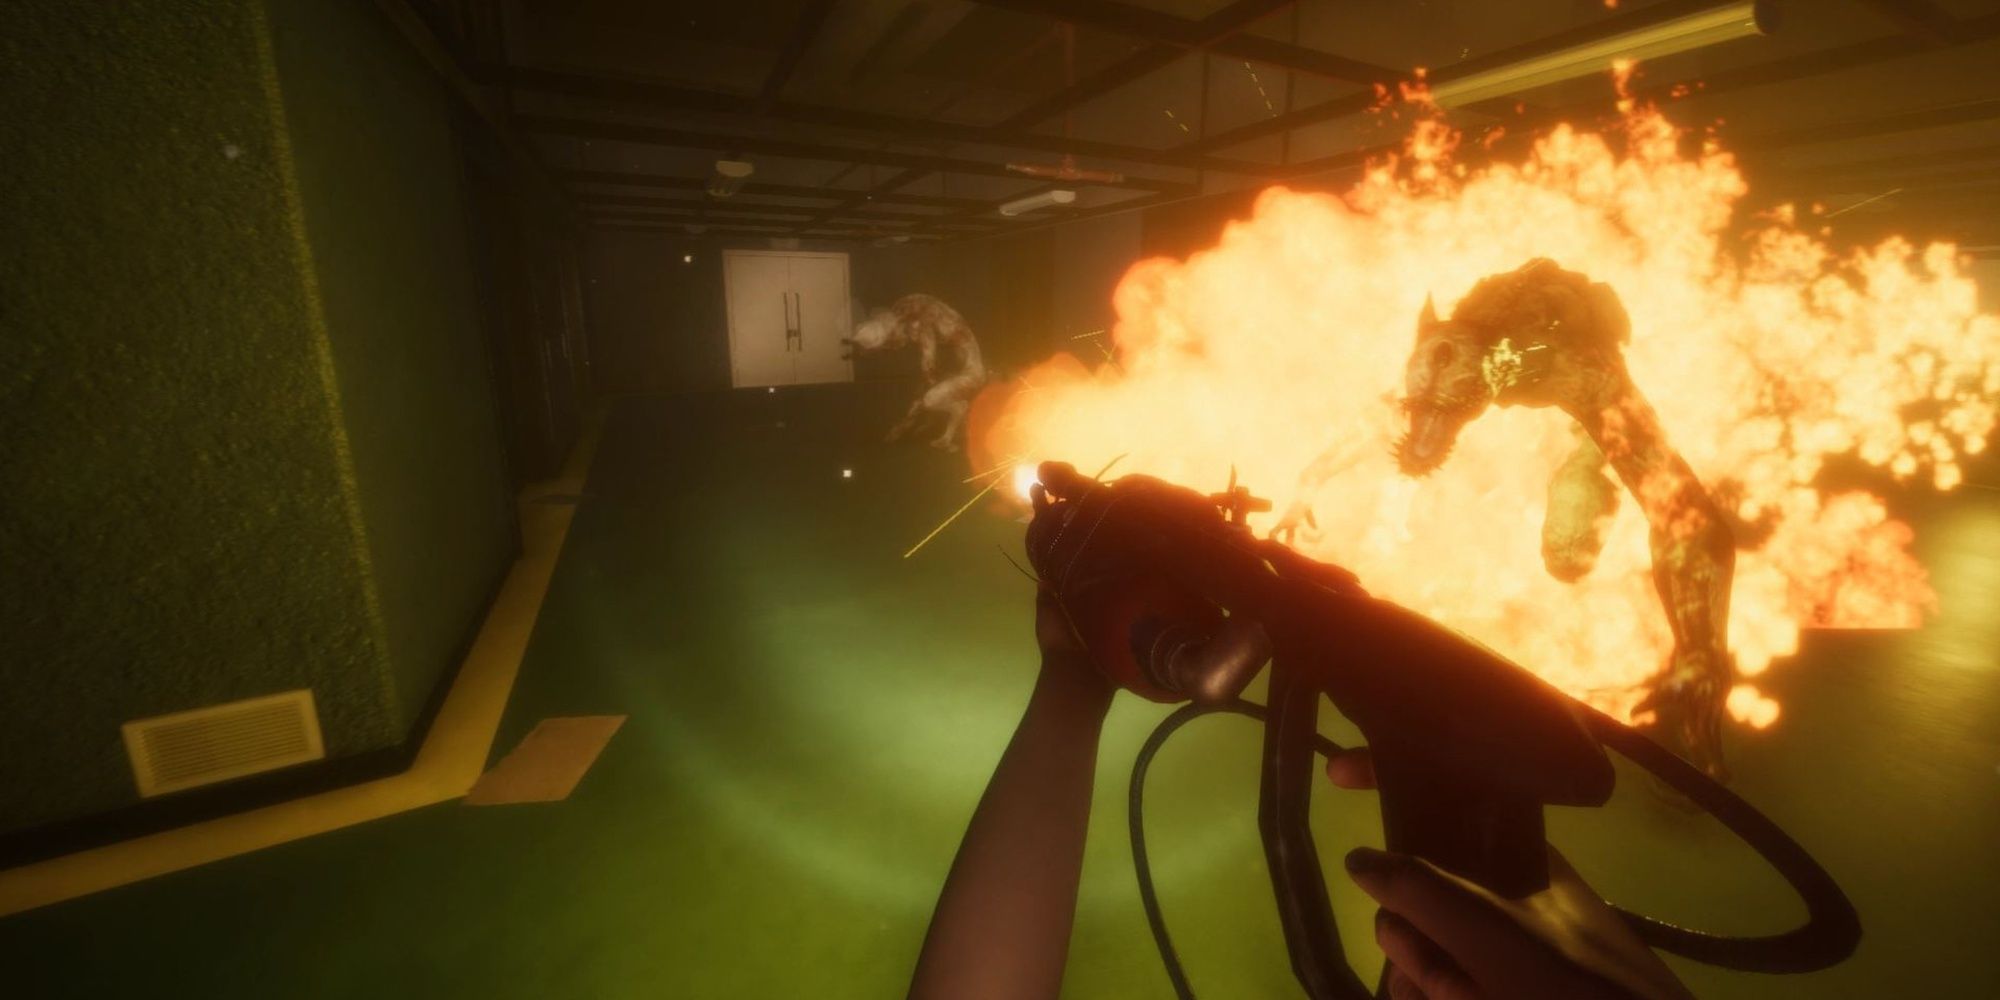 The Highrise: Attacking The Mole Creatures With A Flamethrower